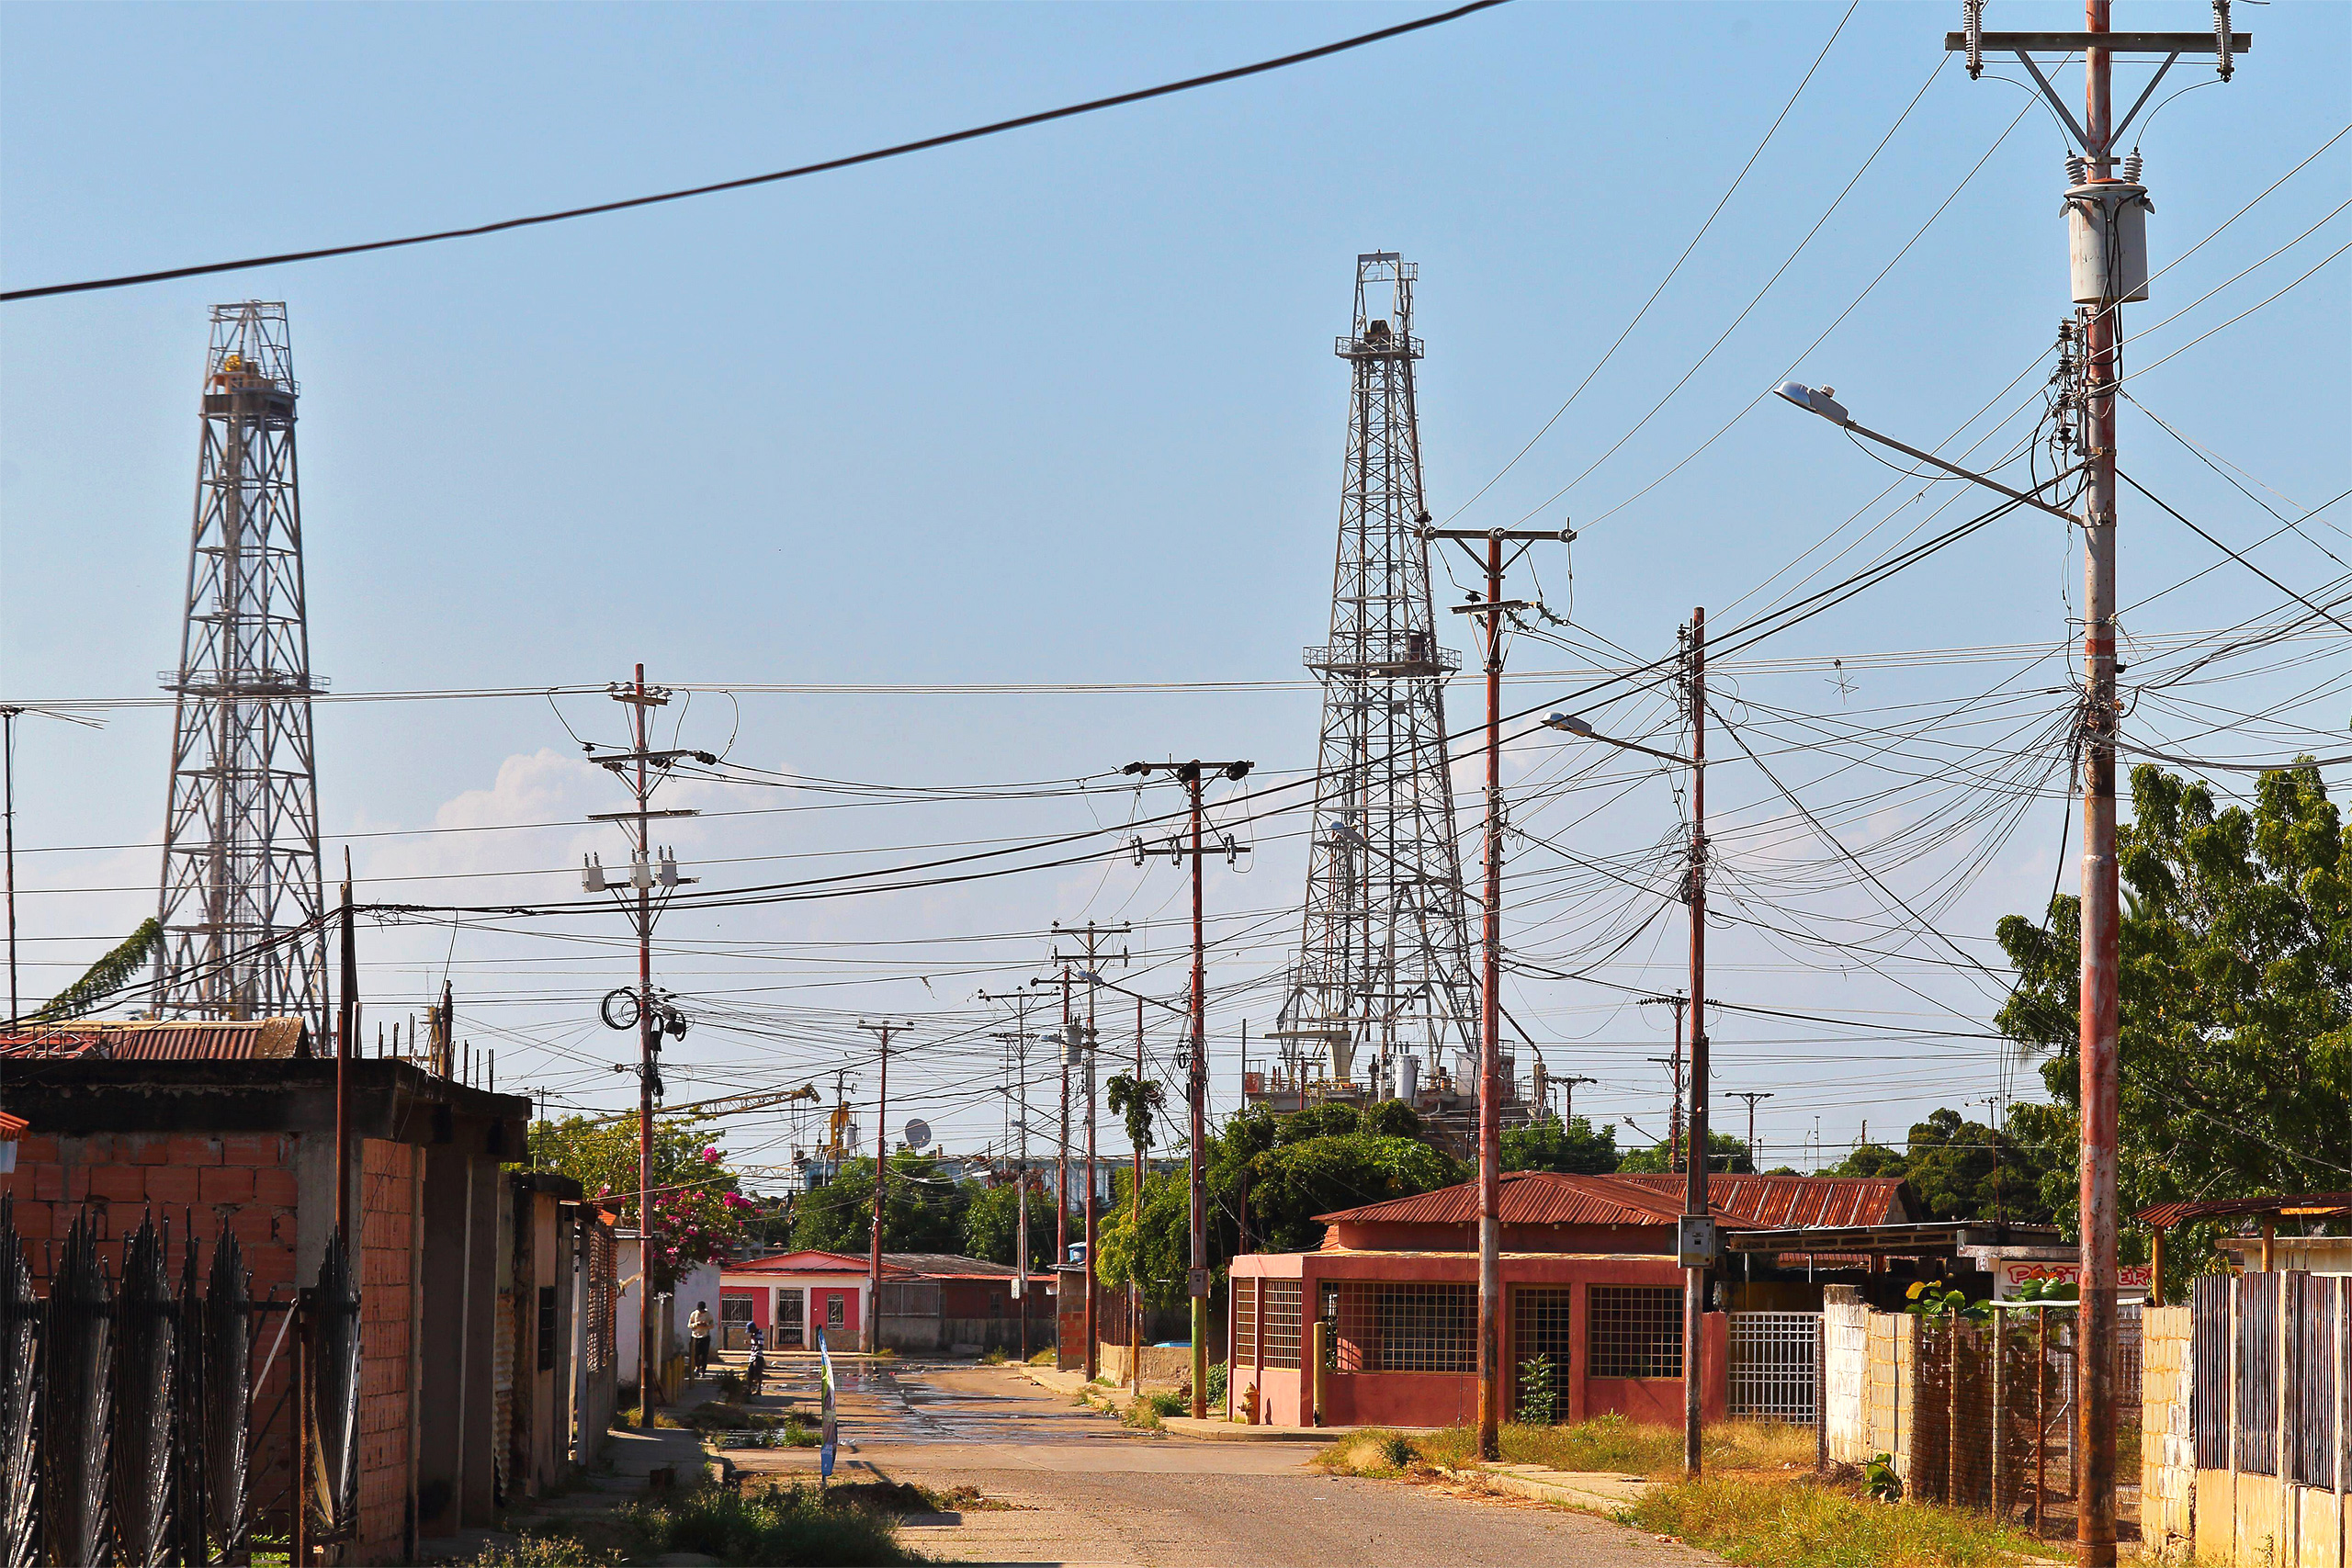 <p>Oil rigs overlook a neighbourhood in Cabimas, Zulia state, north-west Venezuela. During the 2010s, the country experienced a drop in oil production, but now the national government is looking for new partners abroad (Image: Jose Isaac Bula Urrutia / Alamy)</p>